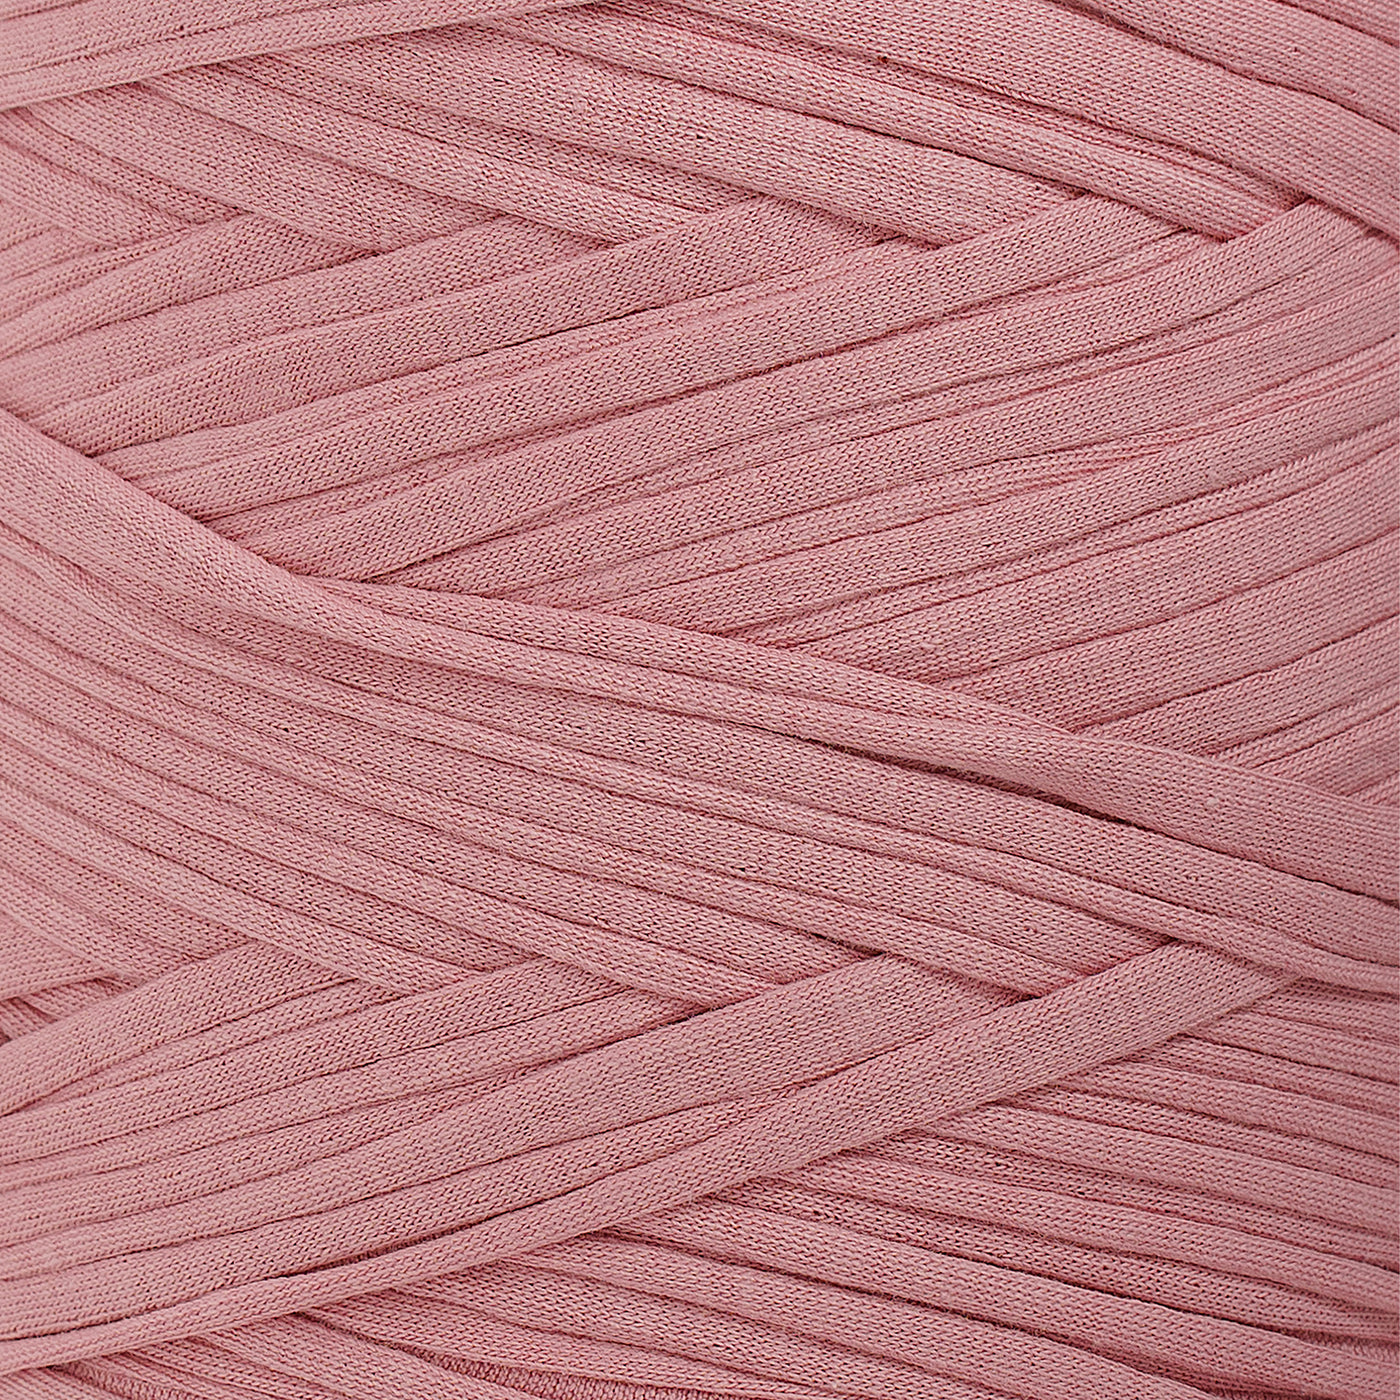 Recycled T-Shirt Fabric Yarn - Pale Pink Color